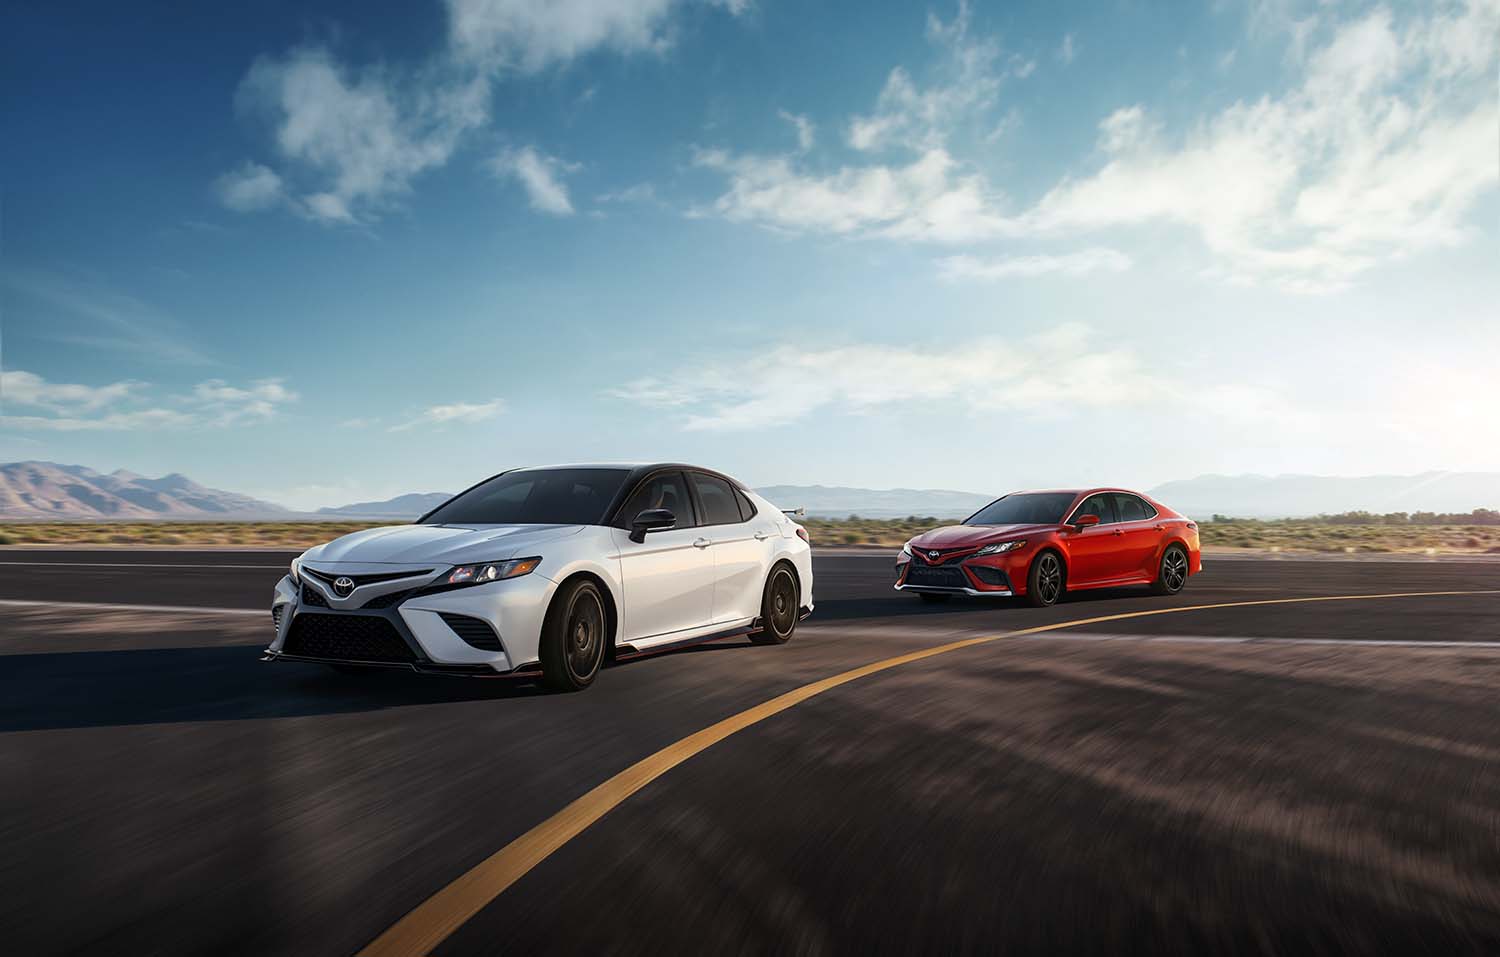 The All-New 2022 Toyota Camry at Bobby Rahal Toyota in Mechanicsburg, PA | Two 2022 Toyota Camry models driving on the race track